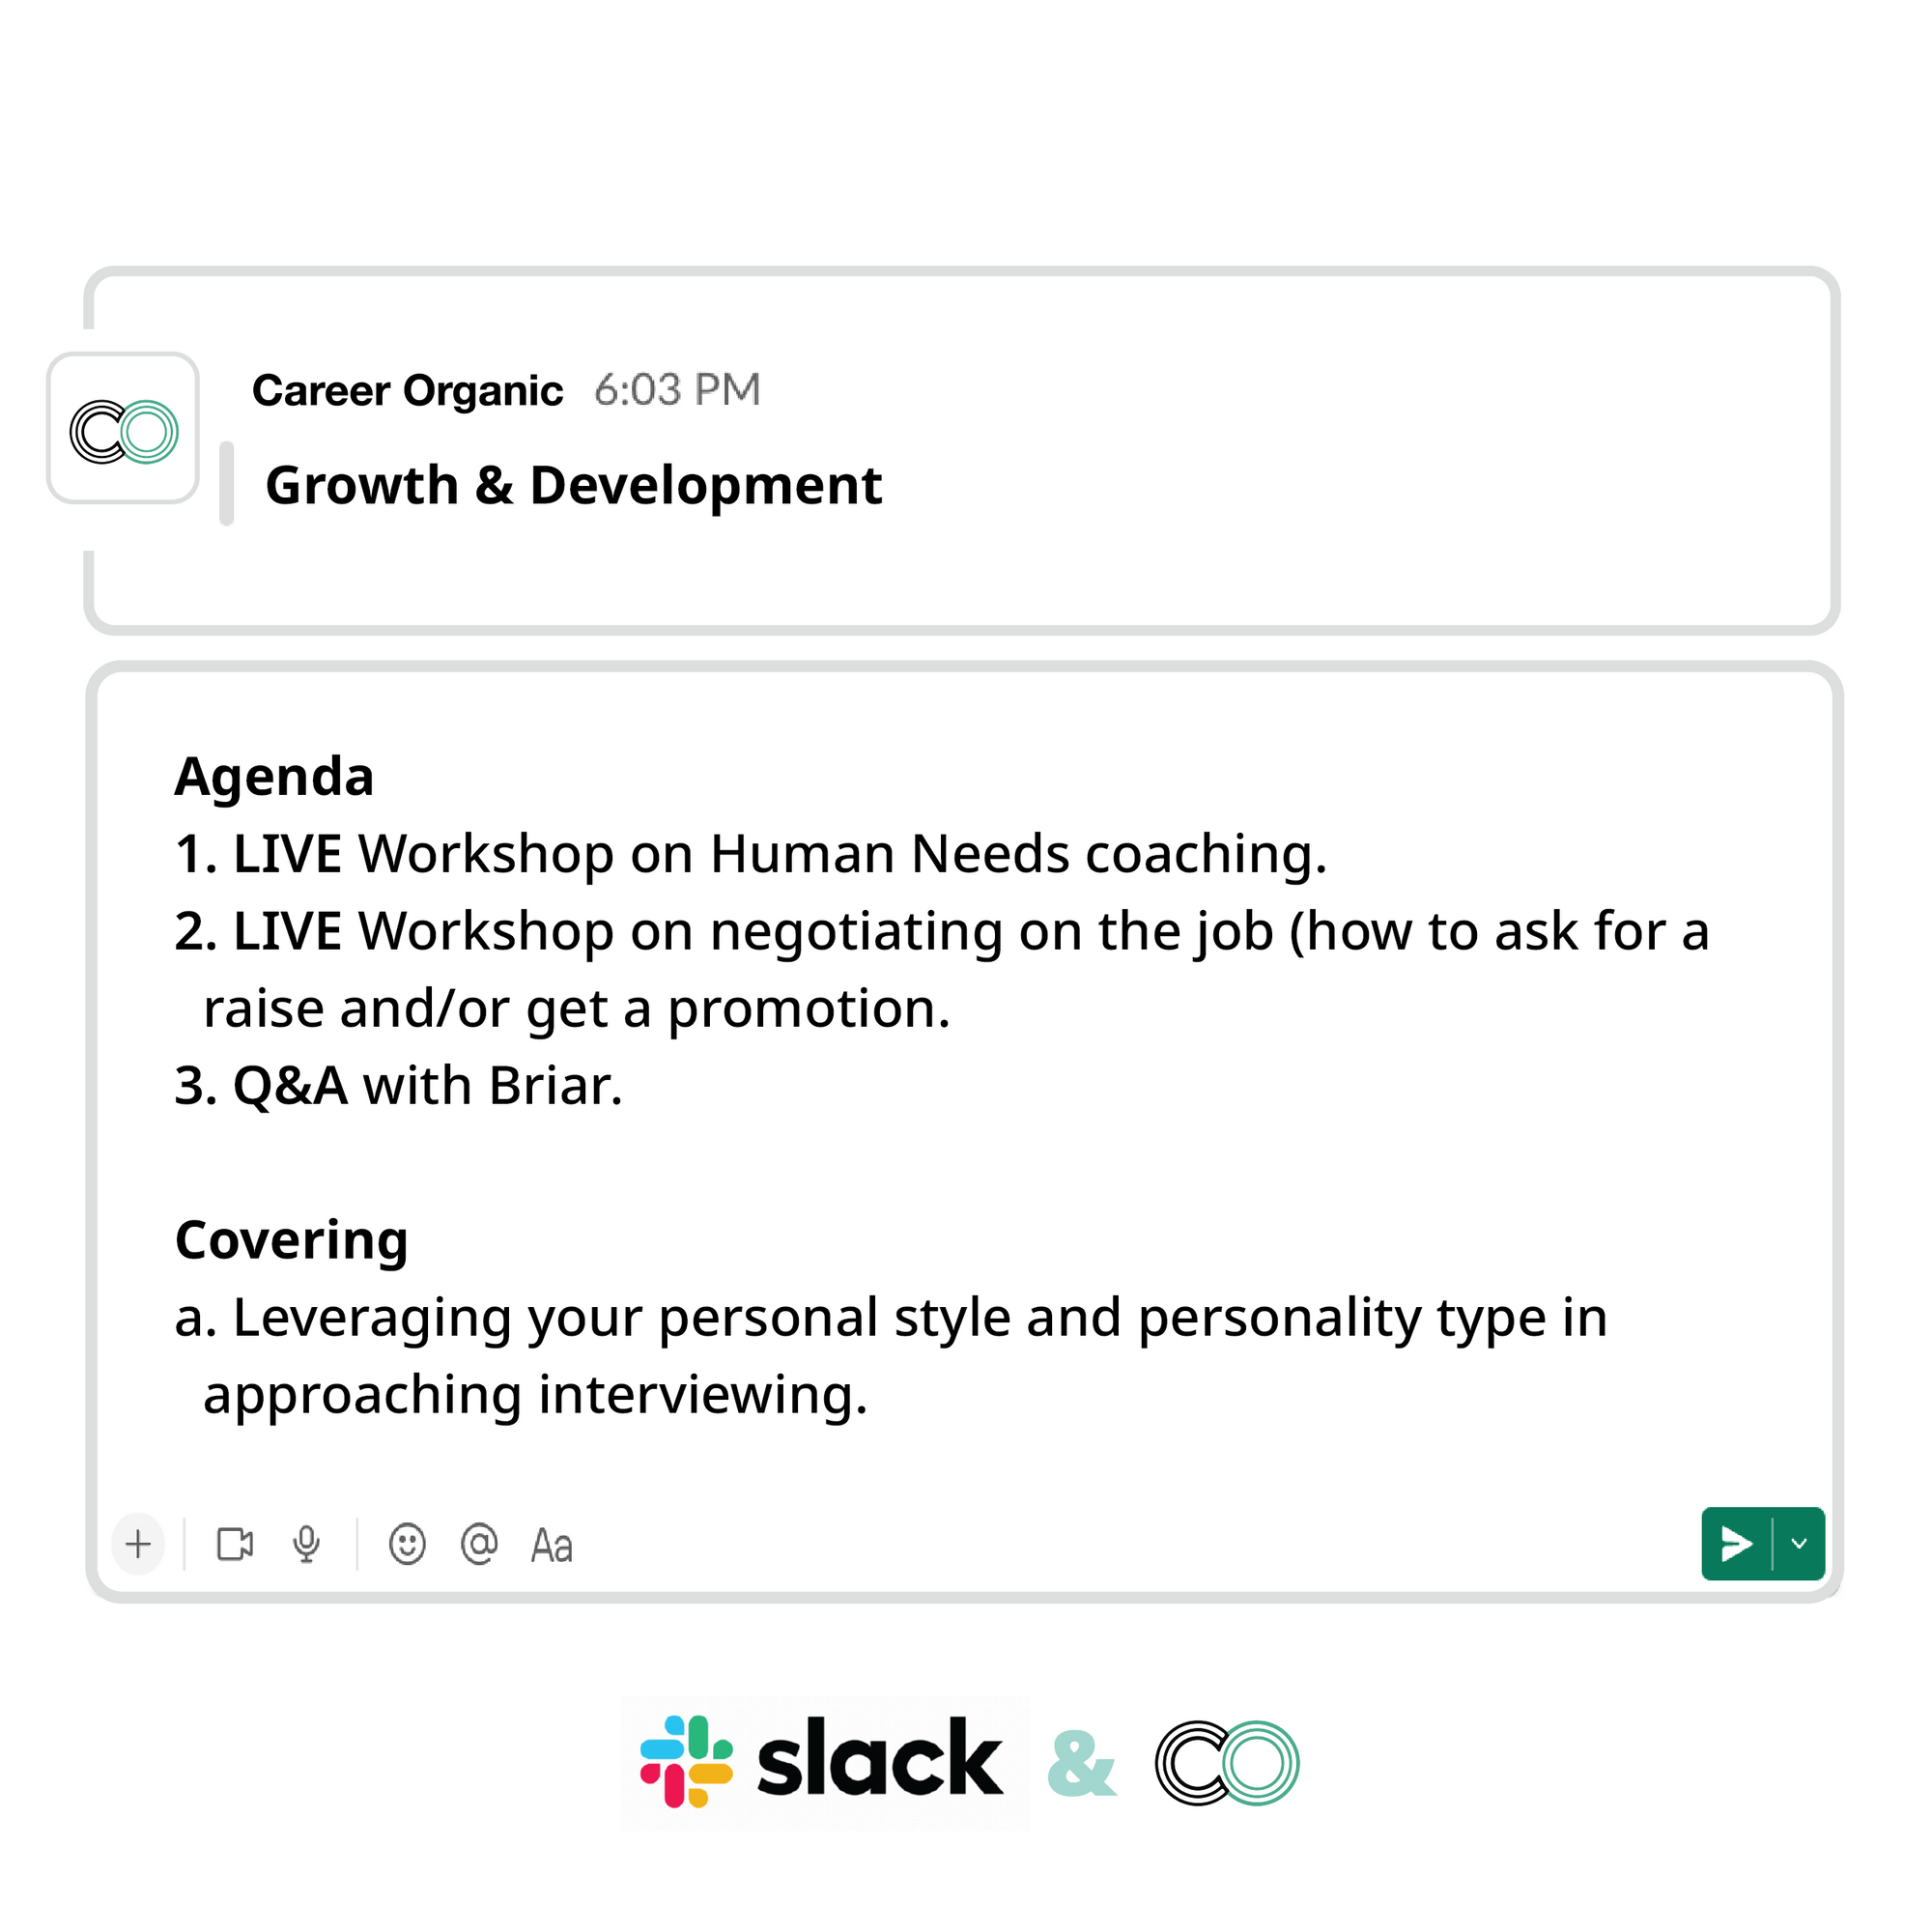 Slack messages displaying the agenda for a growth & development course and group coaching community 